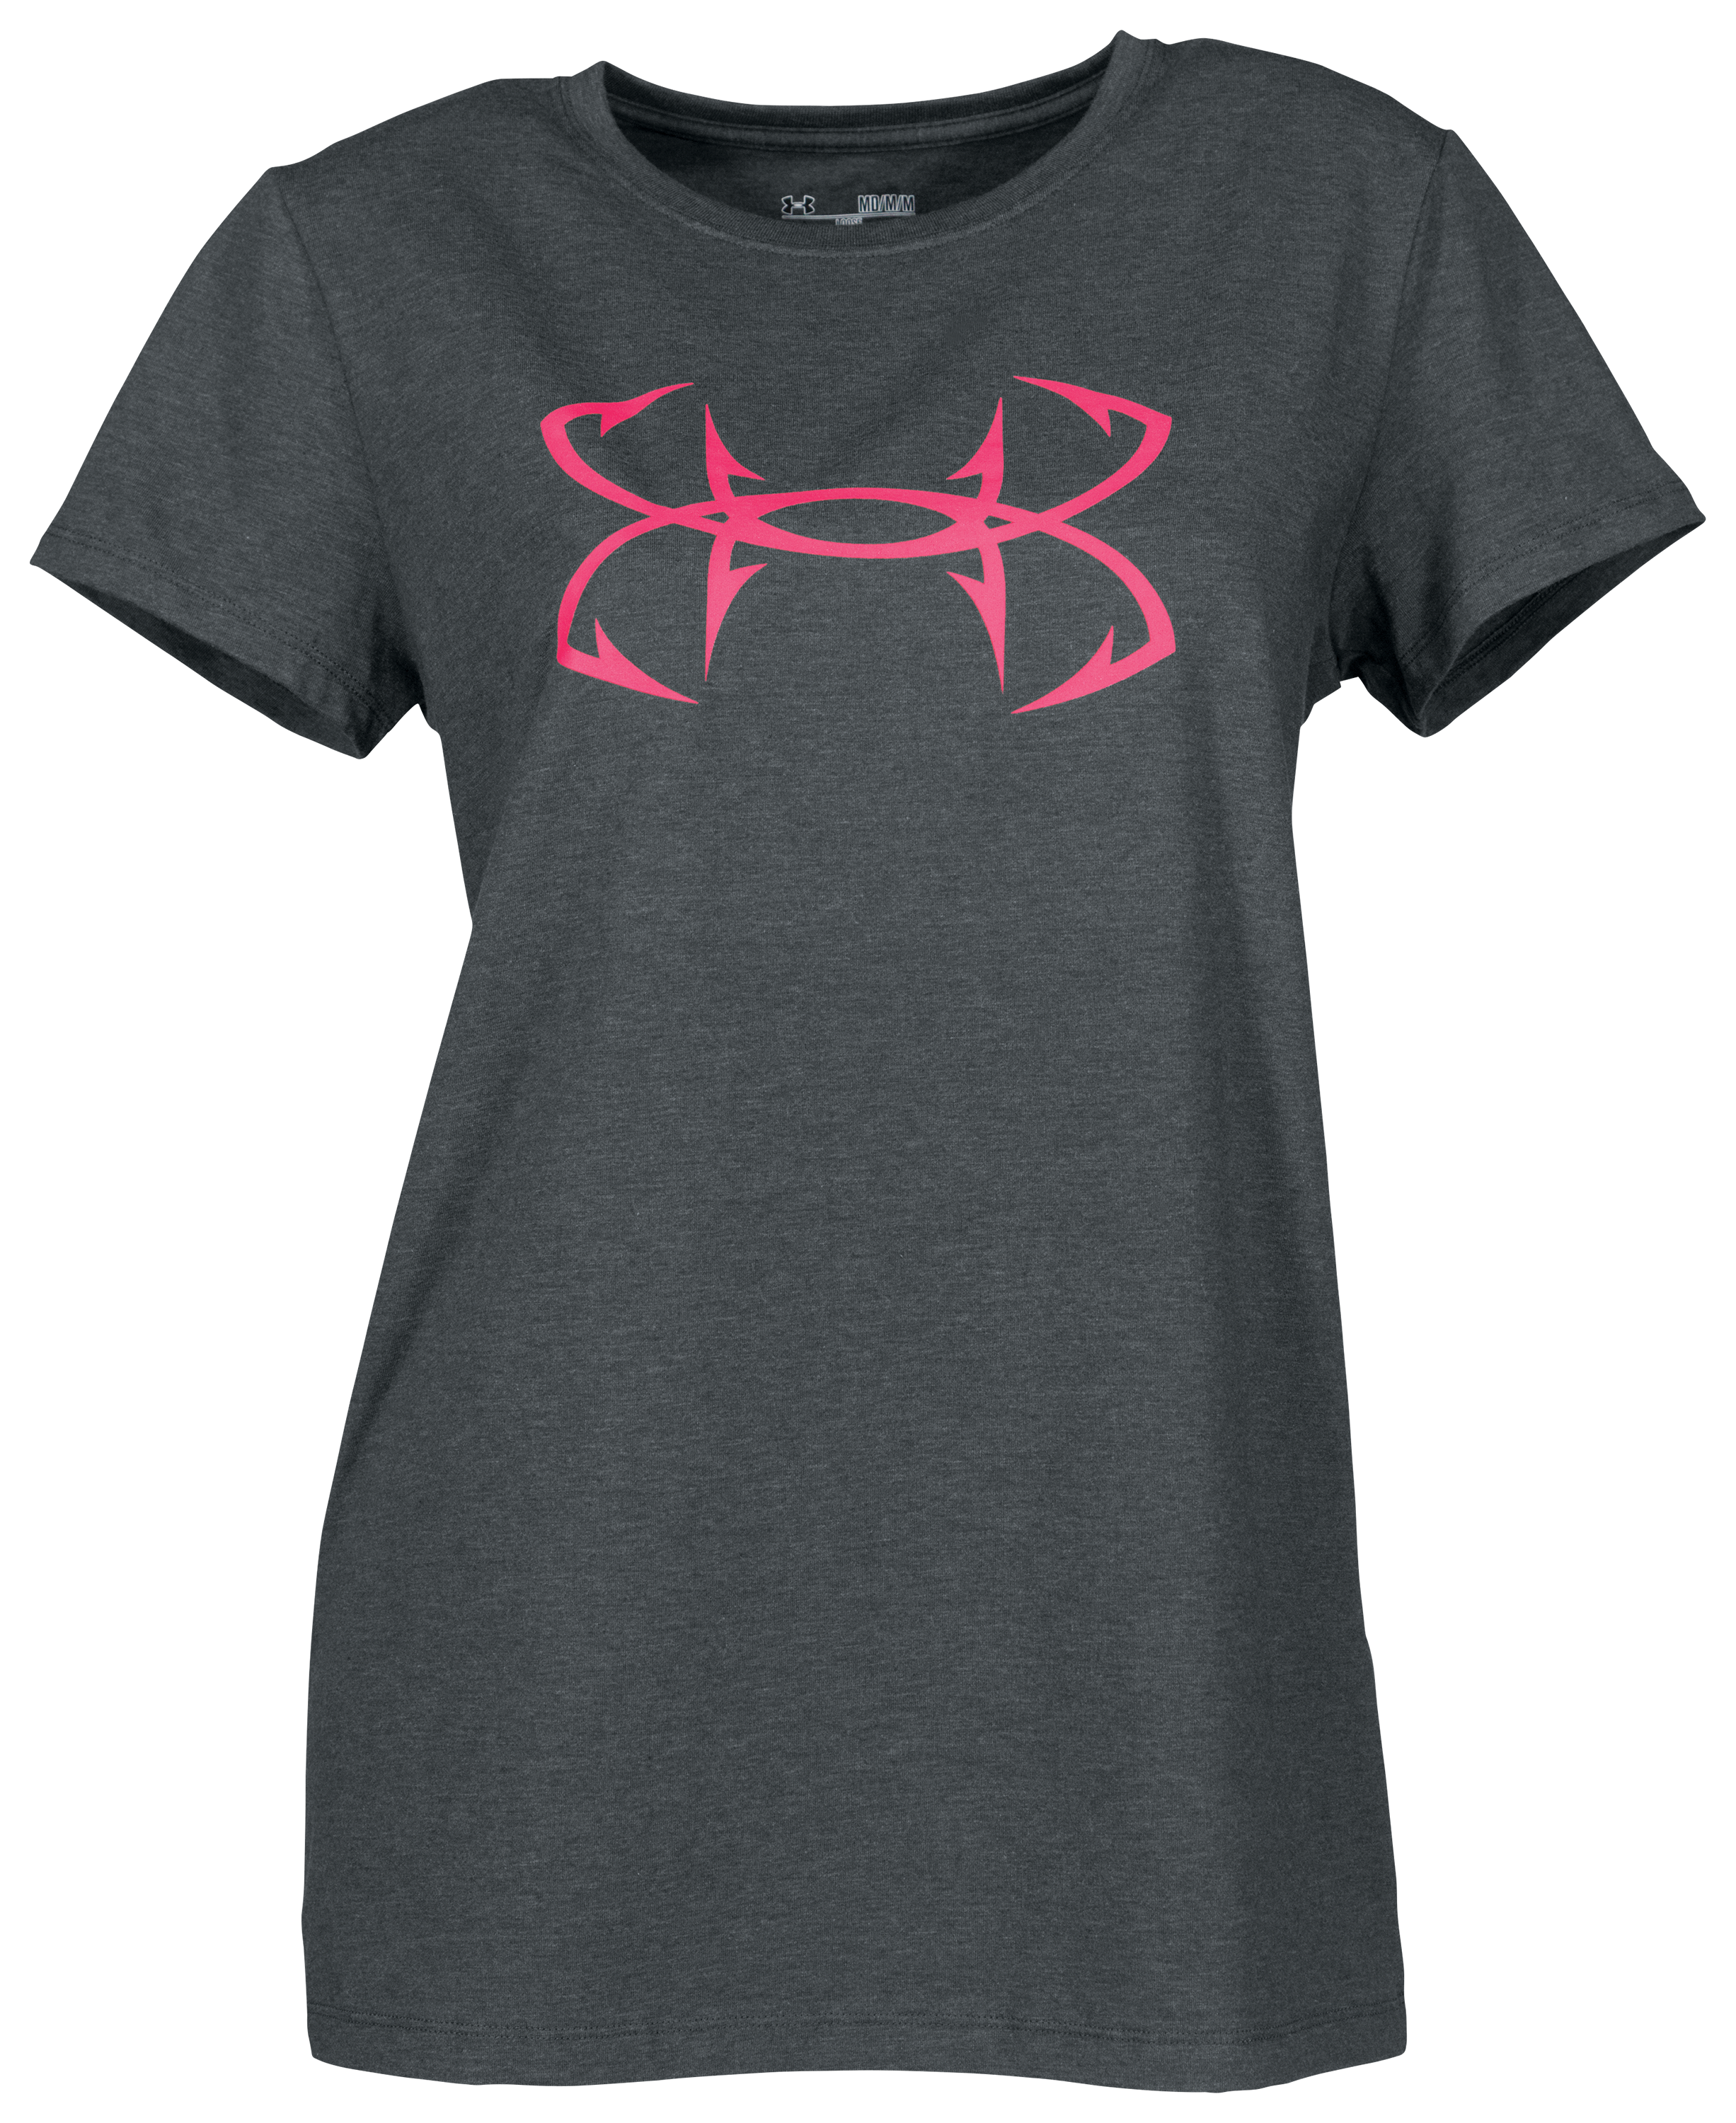 Under Armour Fish Hook Logo T-Shirt for Ladies